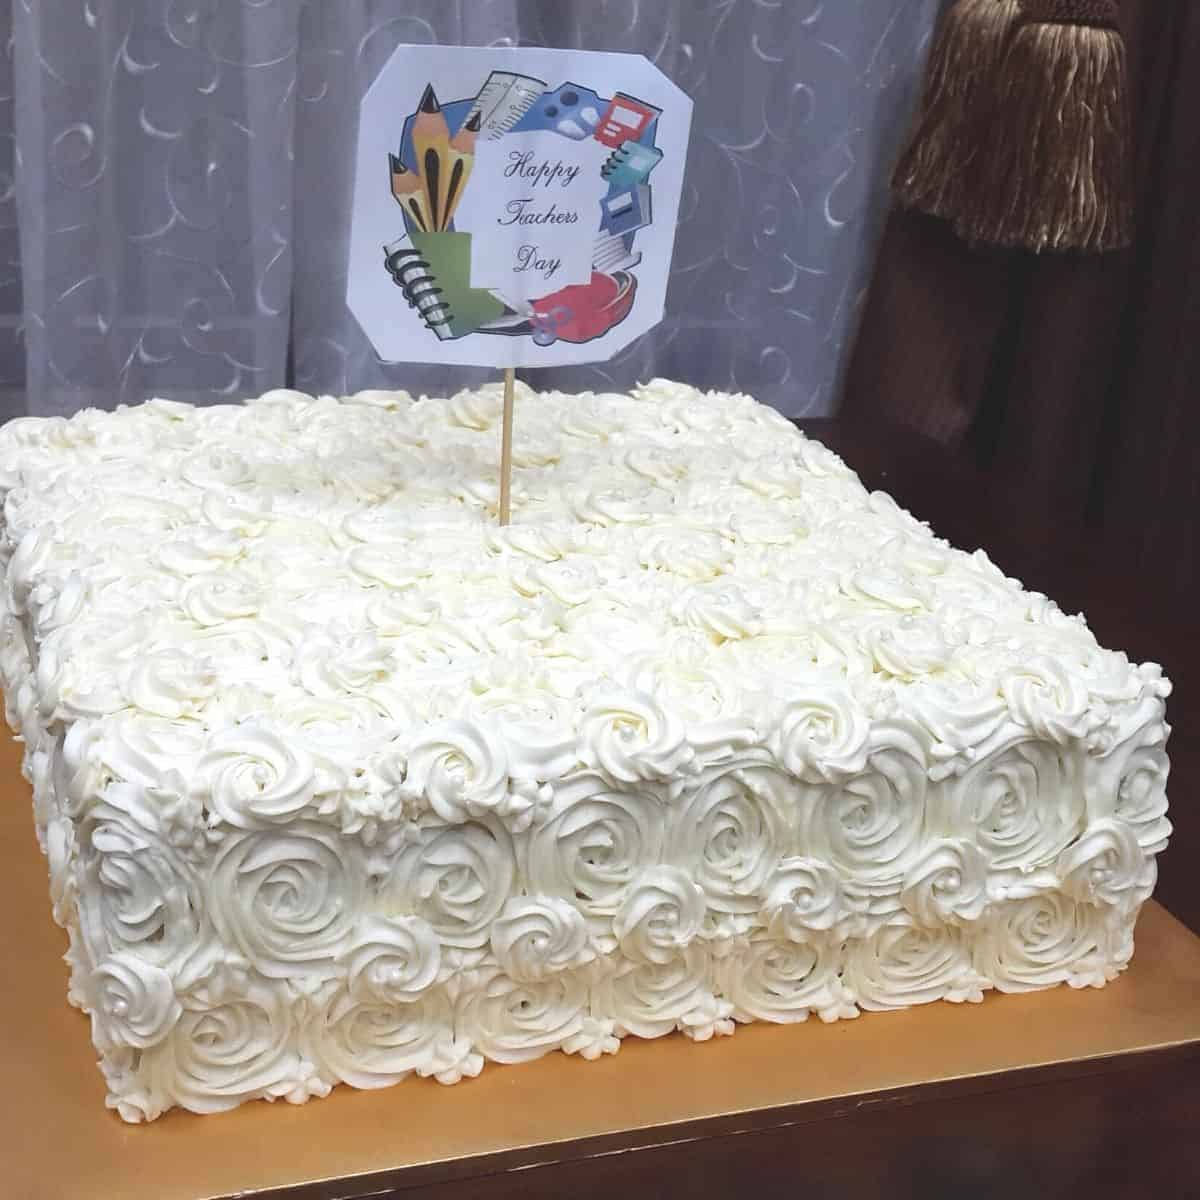 A square cake decorated in white buttercream rosettes and a Teachers Day cake topper